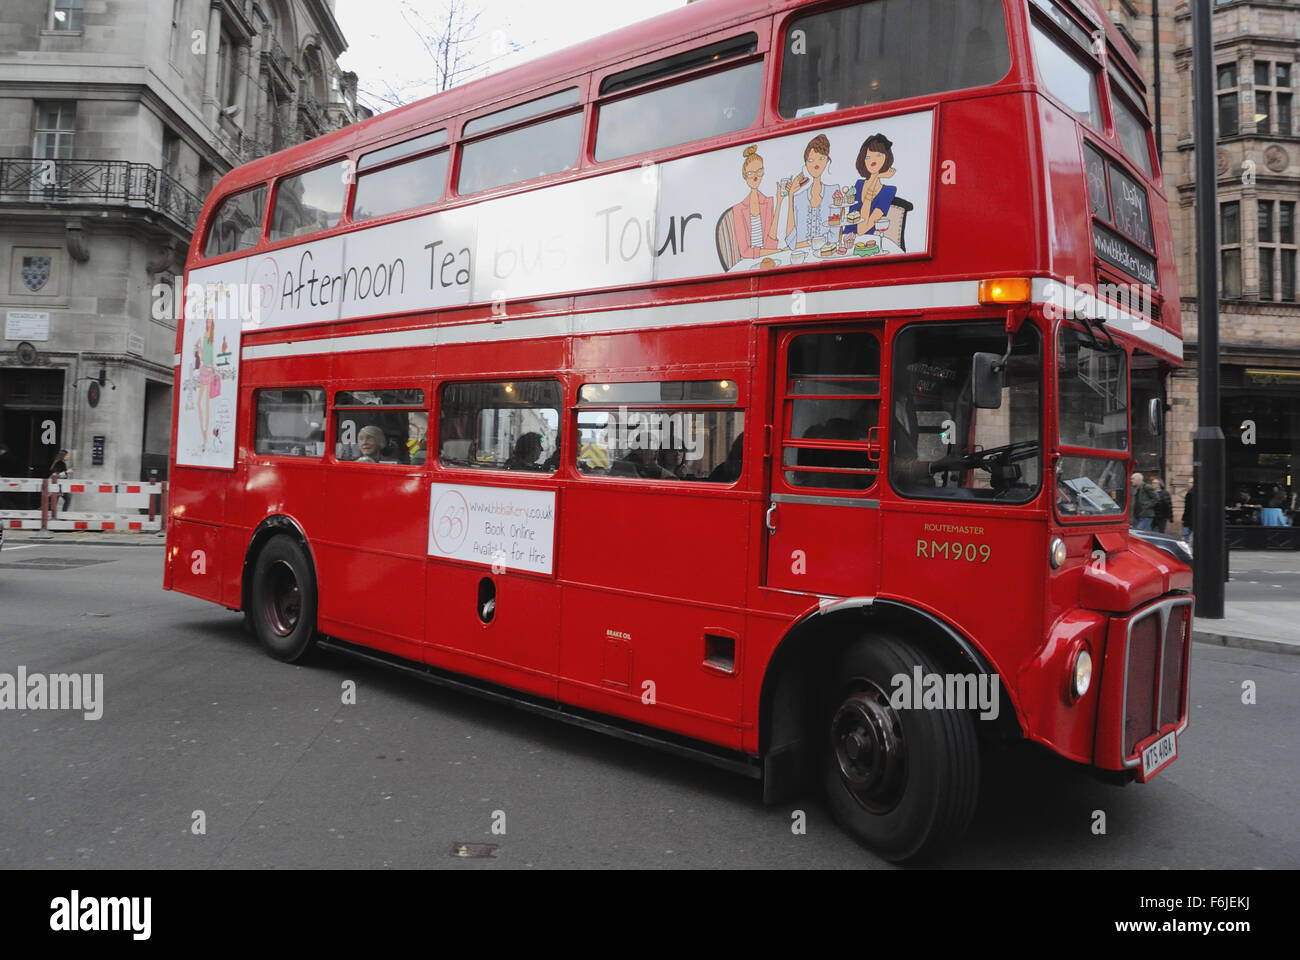 A vintage BB Routemaster double decker bus offering an Afternoon Tea Bus Tour' in Piccadilly, central London England UK Stock Photo